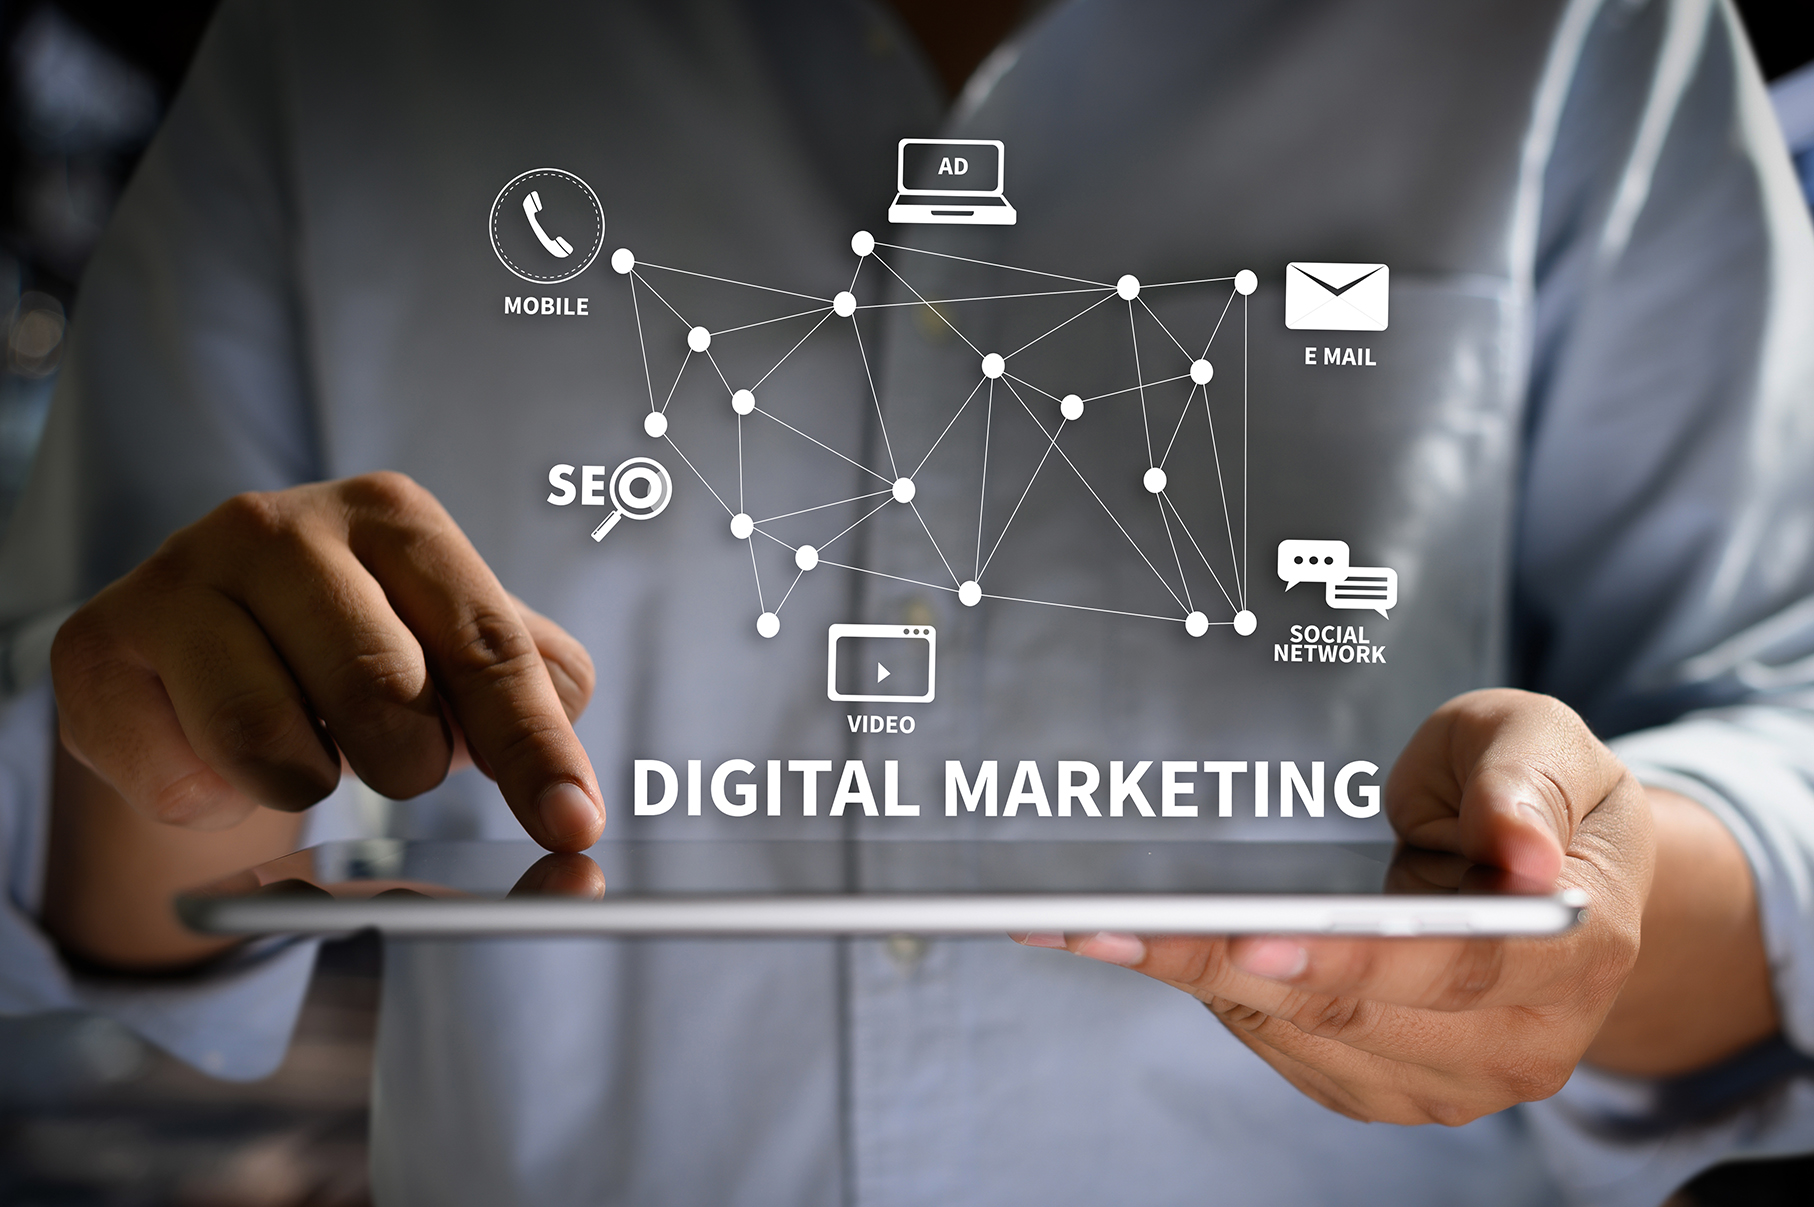 Why Should Businesses Hire A Digital Marketing Agency?